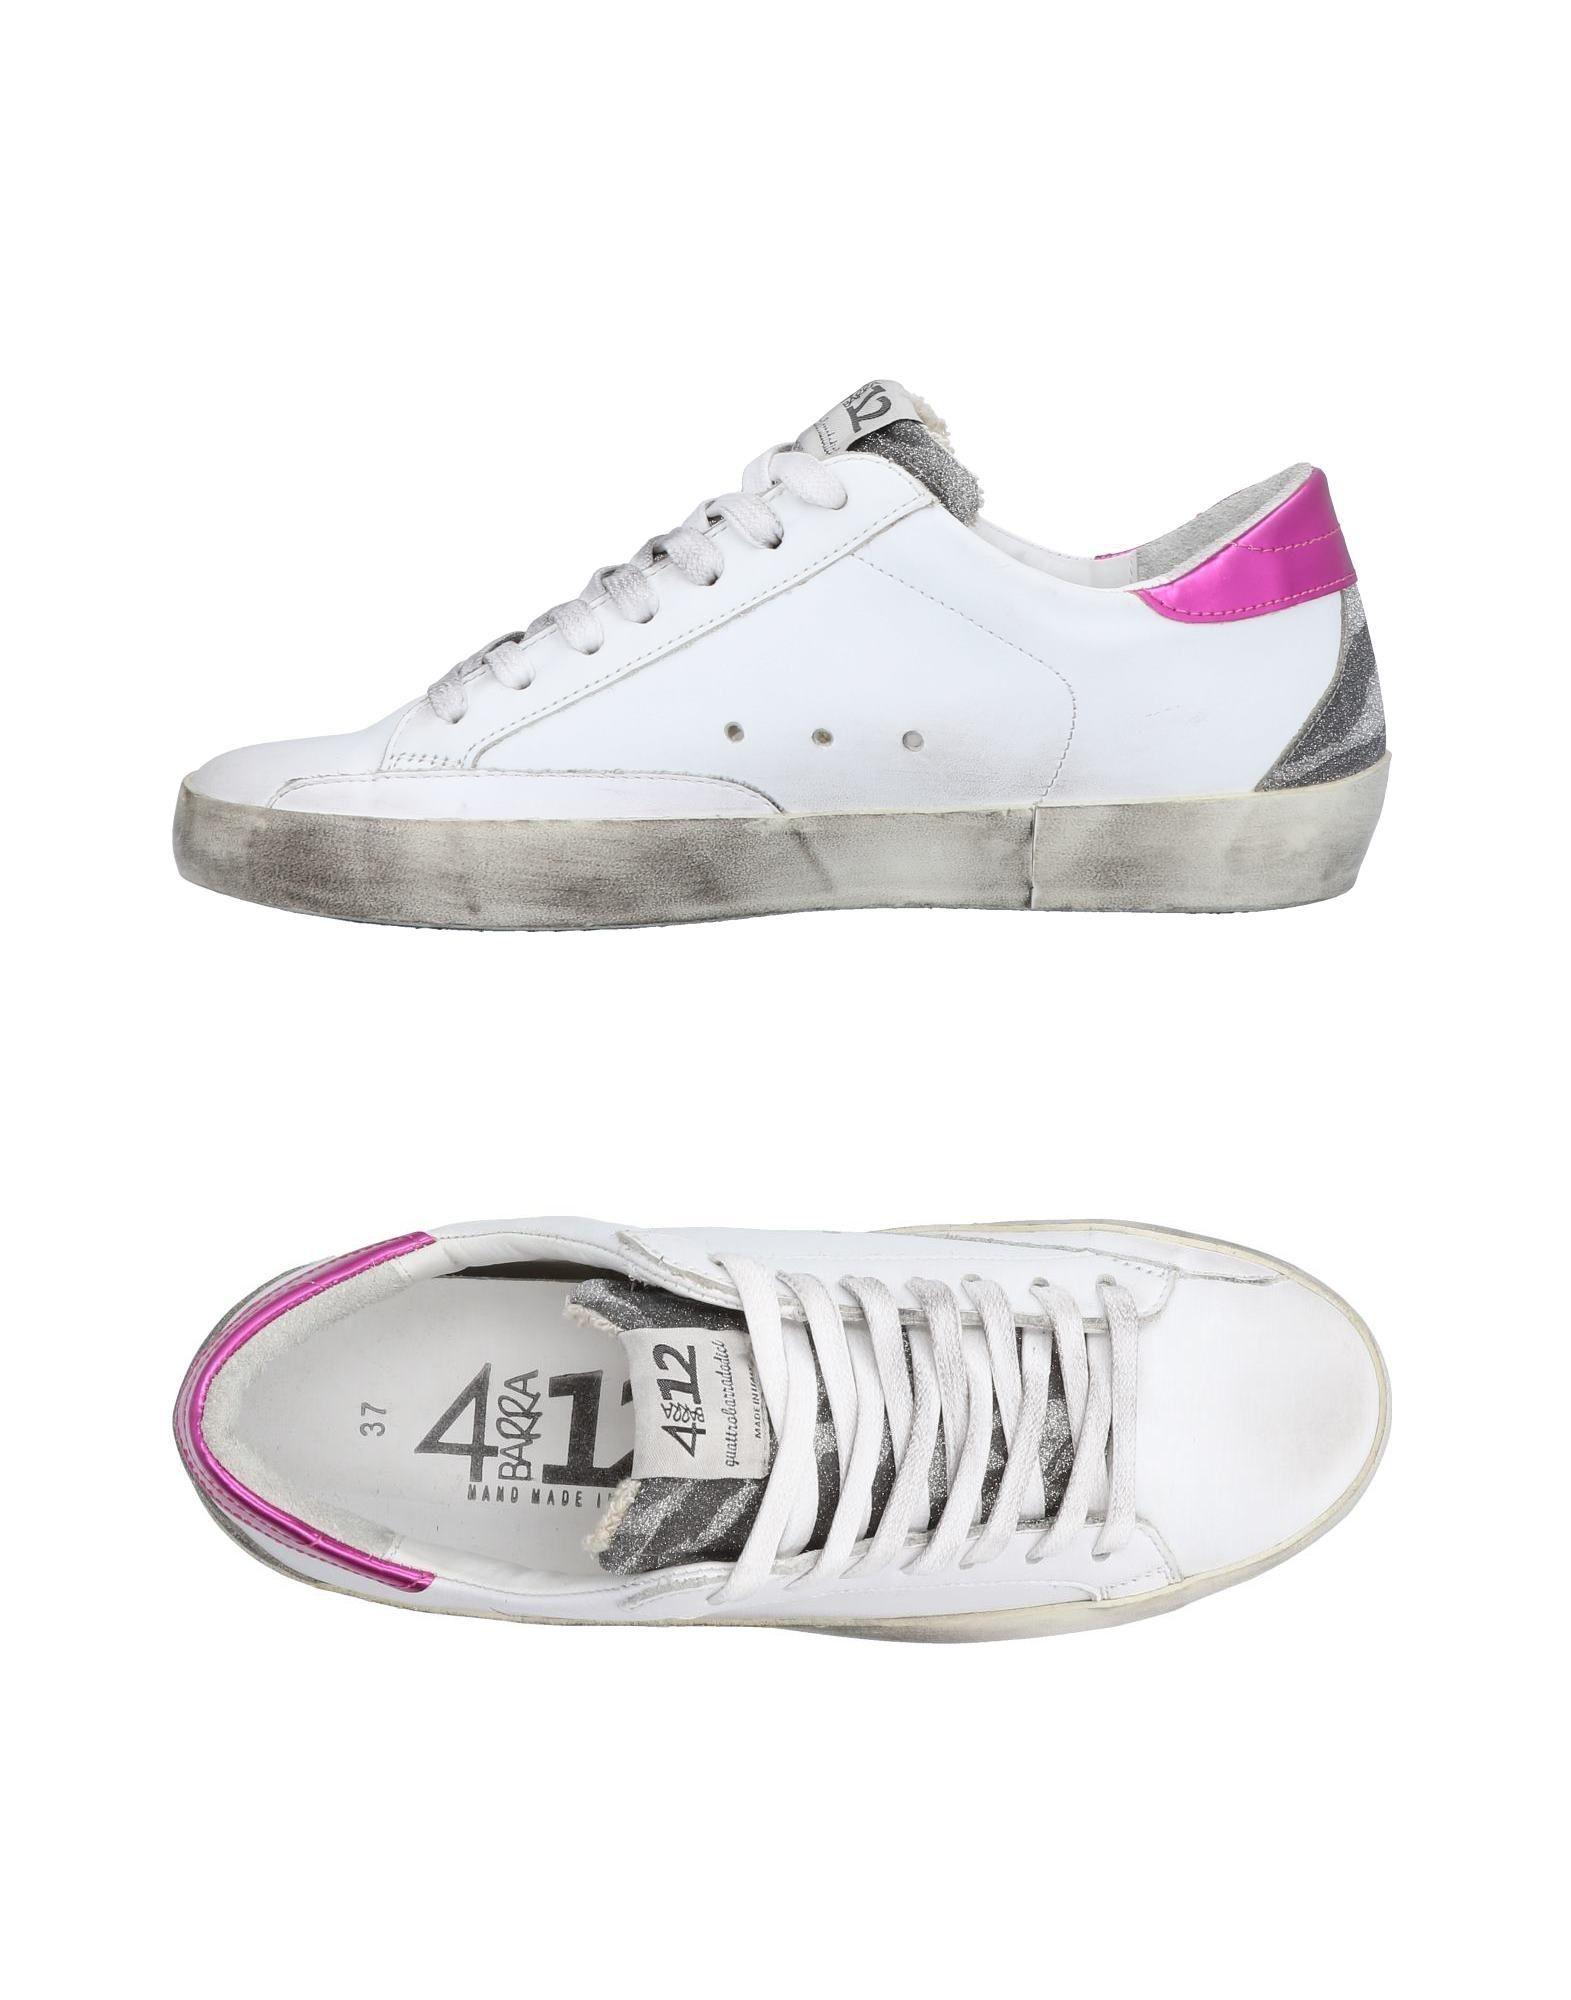 Quattrobarradodici Leather Low-tops & Sneakers in White - Lyst